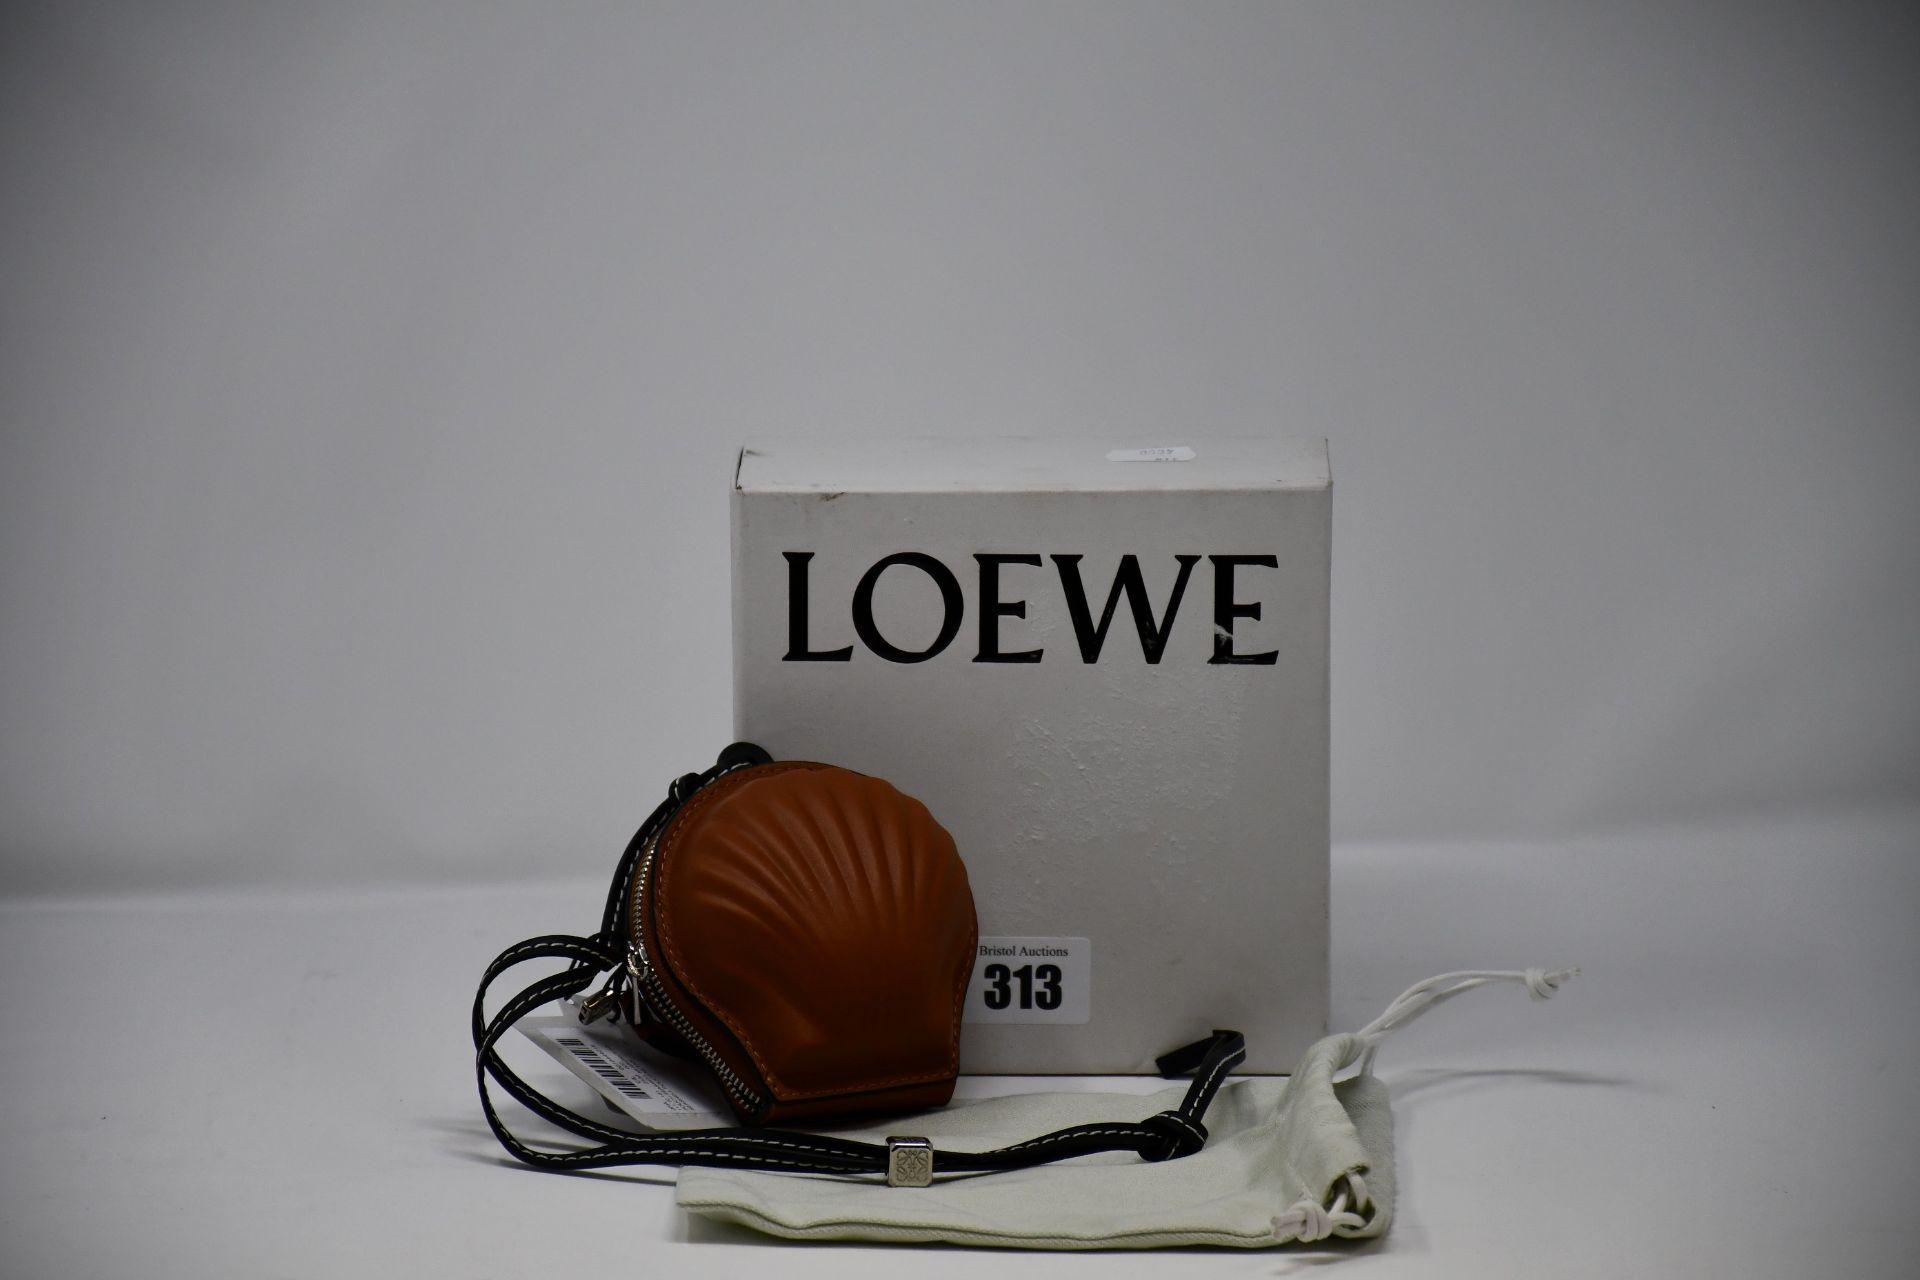 An as new Loewe Seashell pouch (RRP £395).